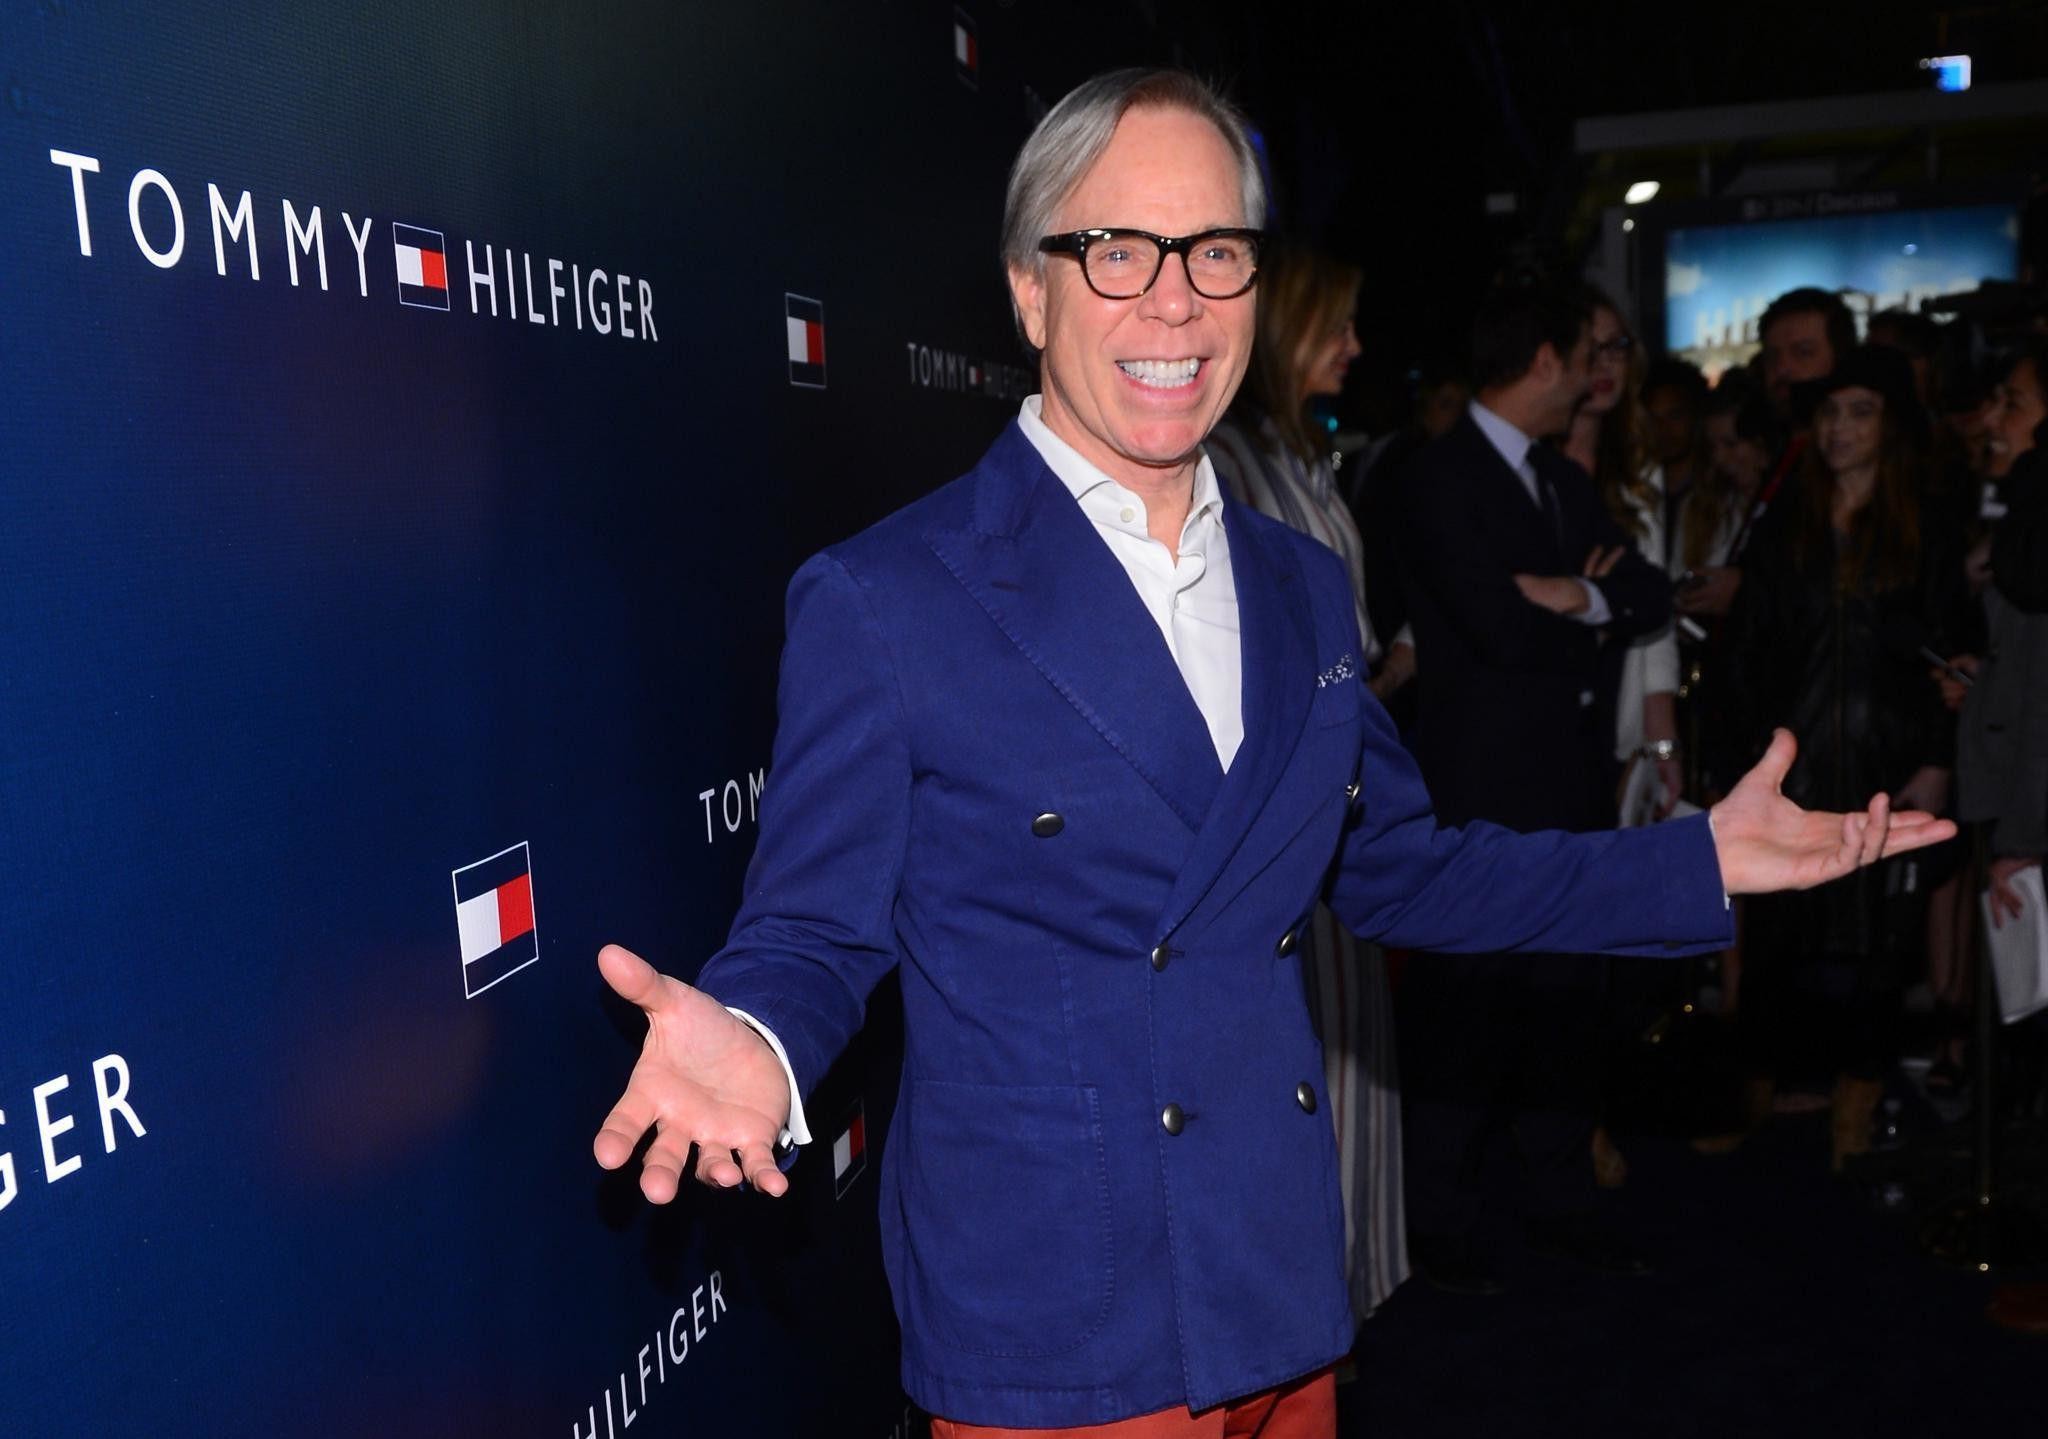 2048x1439 Tommy Hilfiger Wallpapers Images Photos Pictures Backgrounds